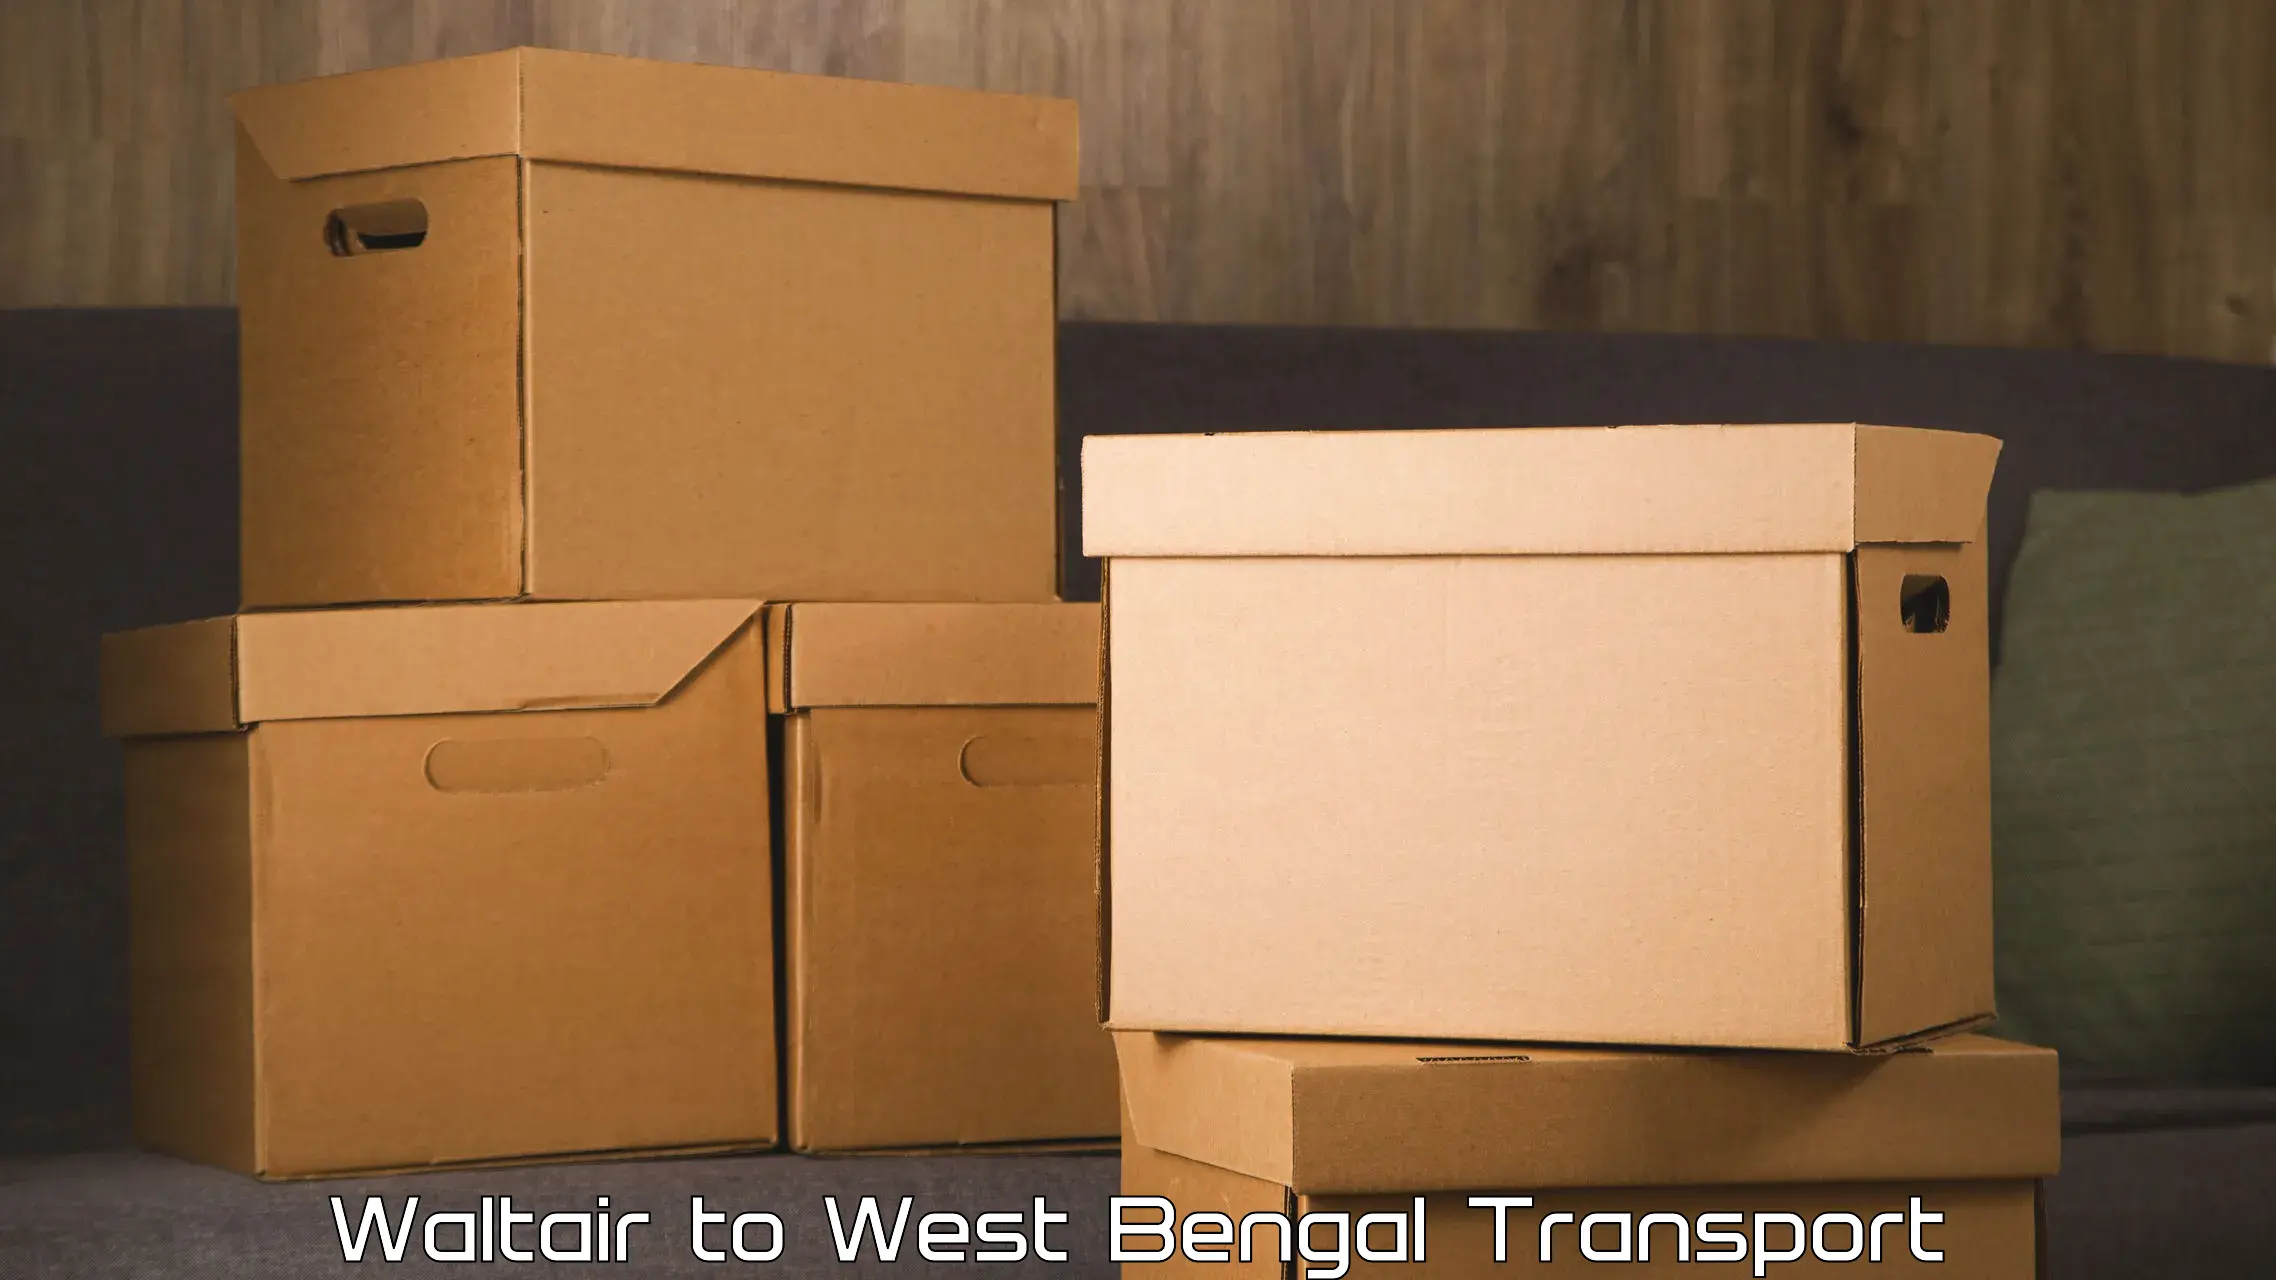 Cycle transportation service Waltair to West Bengal